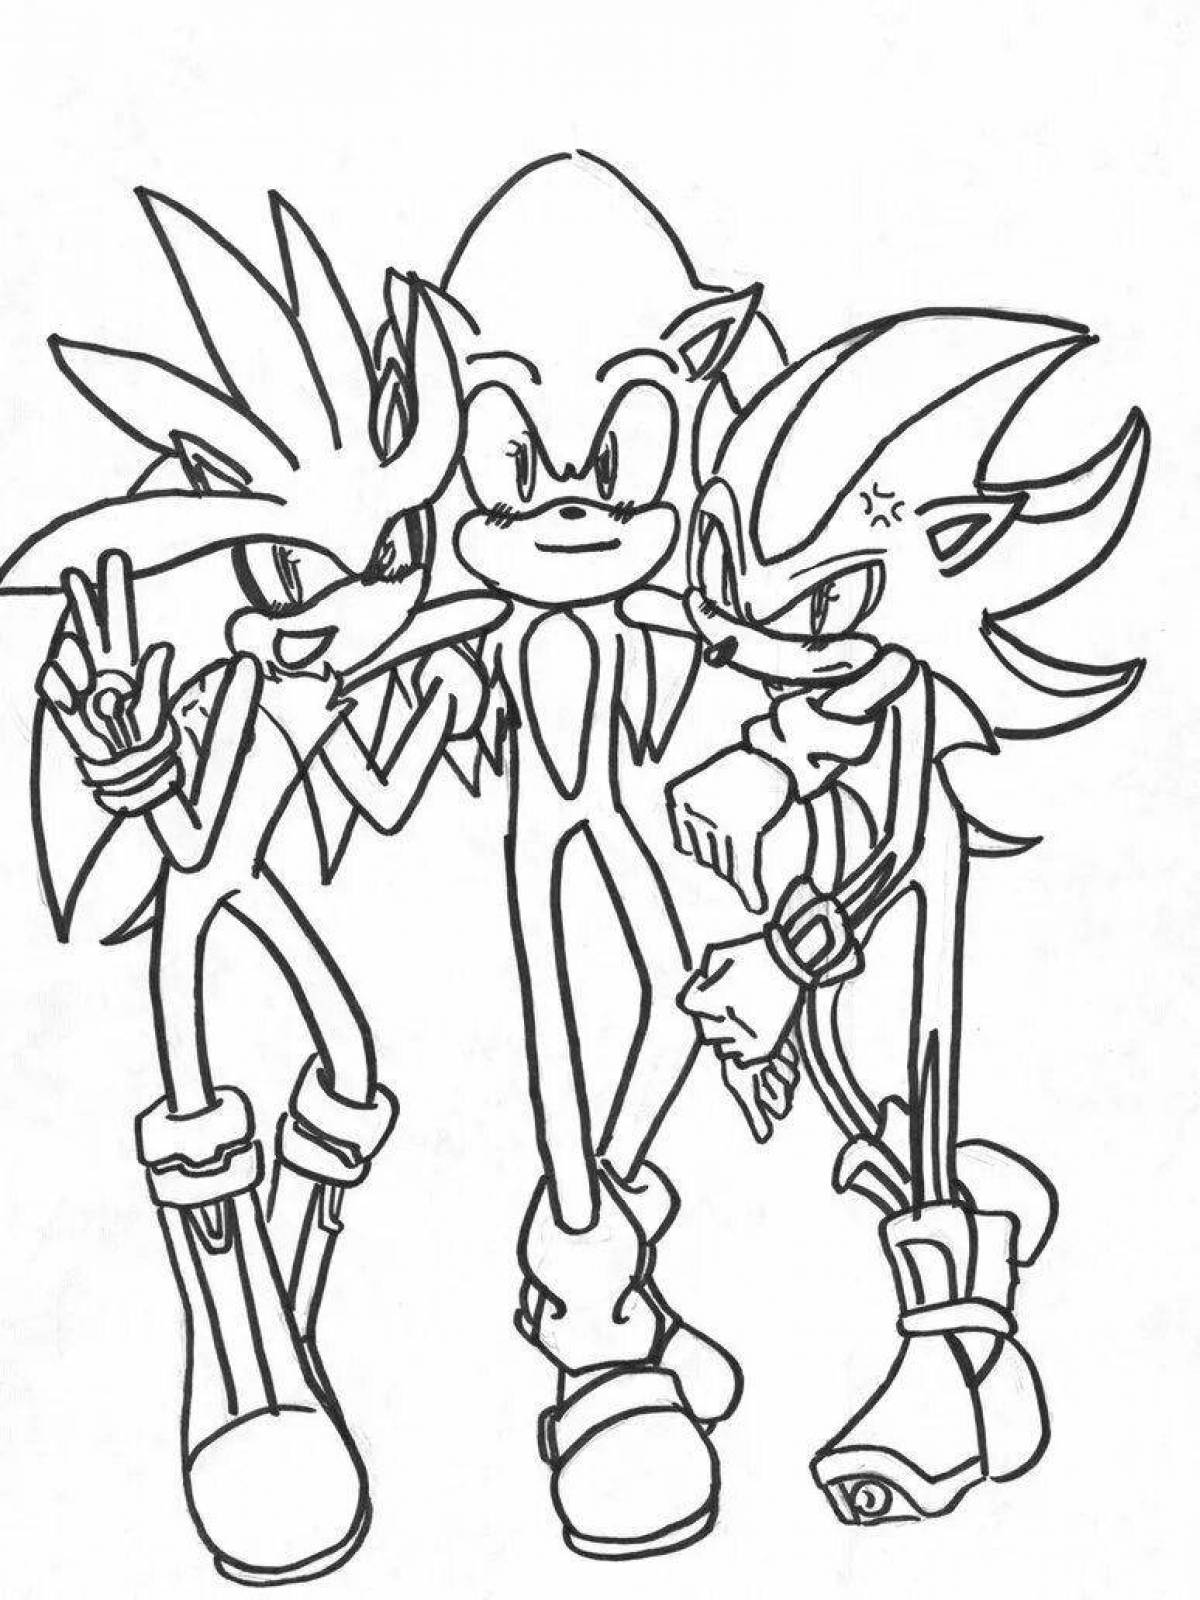 Sonic silver and shadow #2